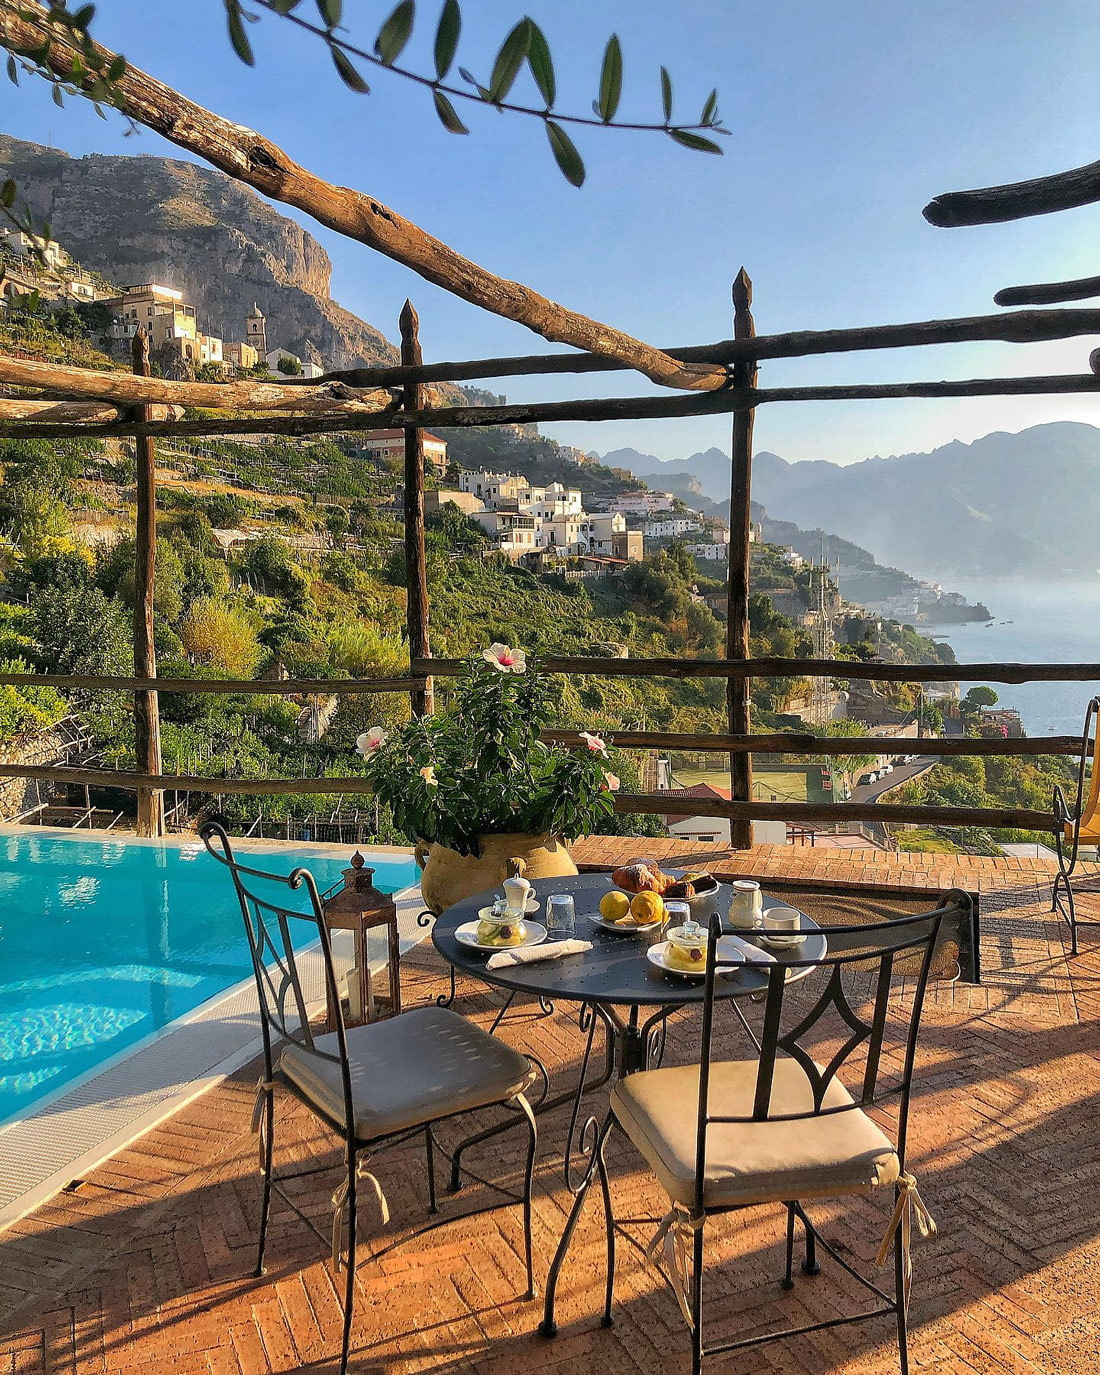 Villa with outdoor pool in Amalfi